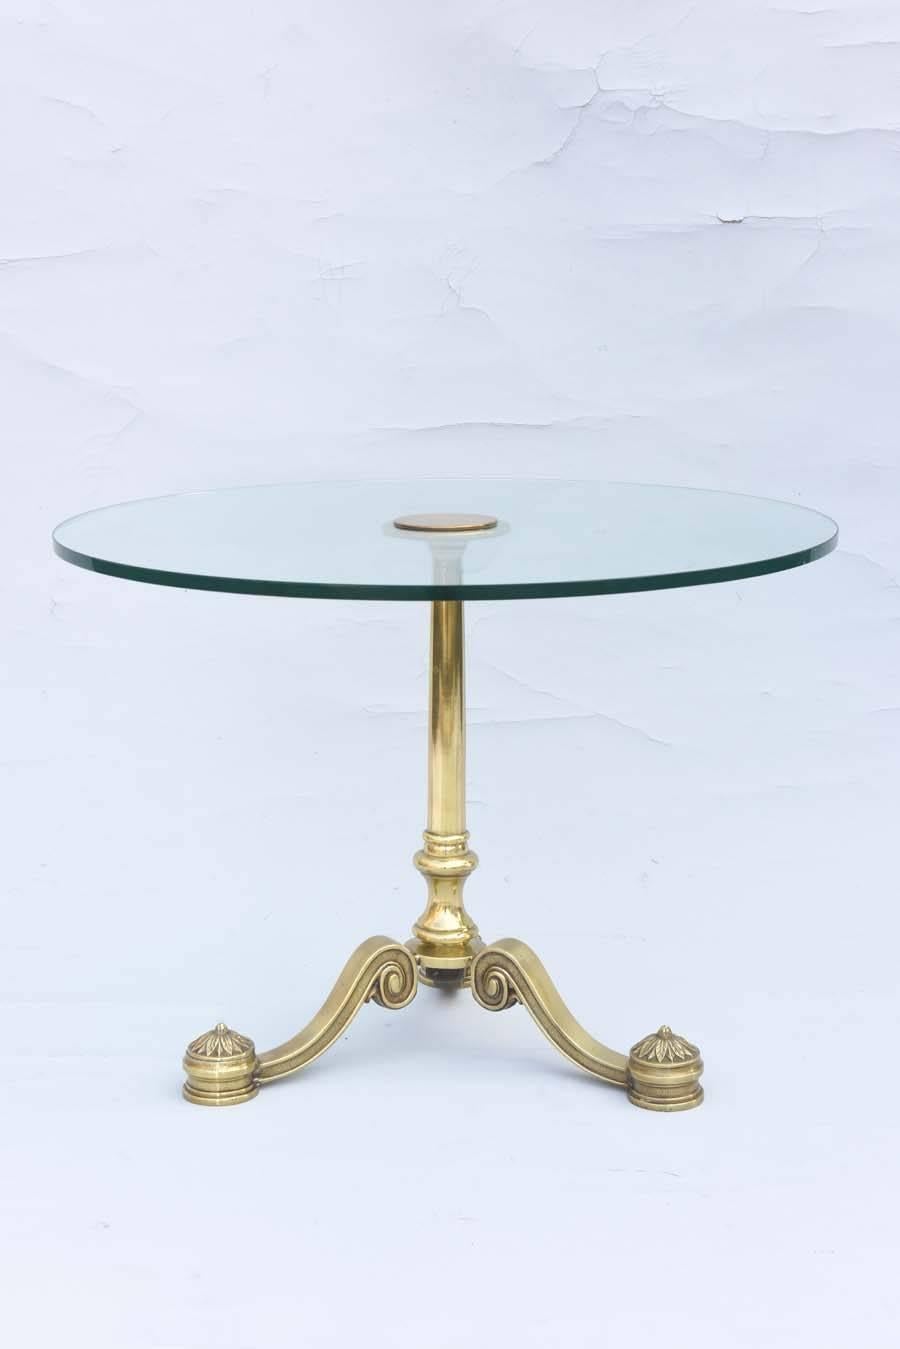 Accent table, having a round top of glass, on column pedestal, raised on three splayed legs, decorated with scrolls and rosettes.

Stock ID: D6753